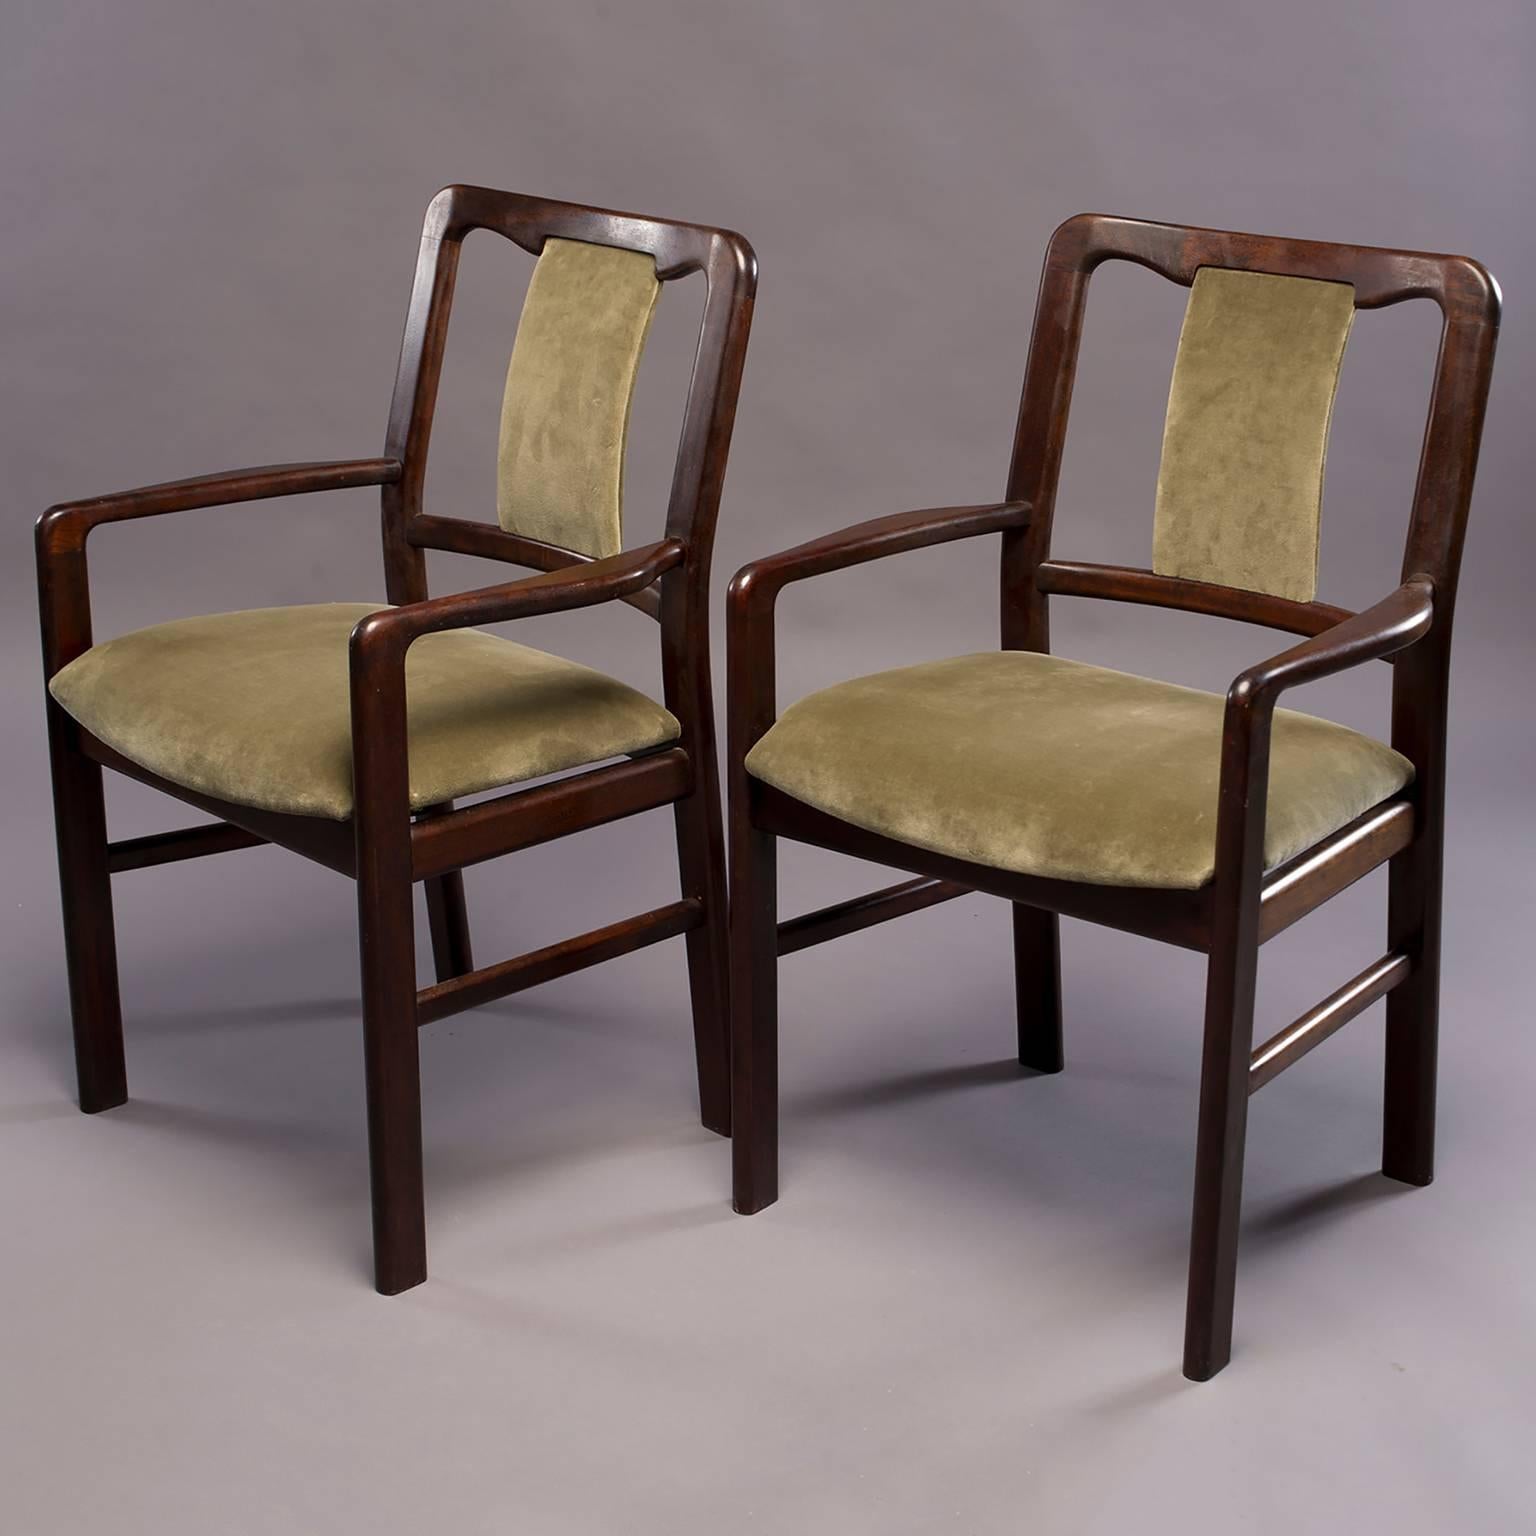 Set of six, circa 1970s Danish rosewood frame chairs includes two arm chairs and four side chairs. All seats and backs have been professionally upholstered in moss green velvet. Unknown Danish maker - overall very good vintage condition.